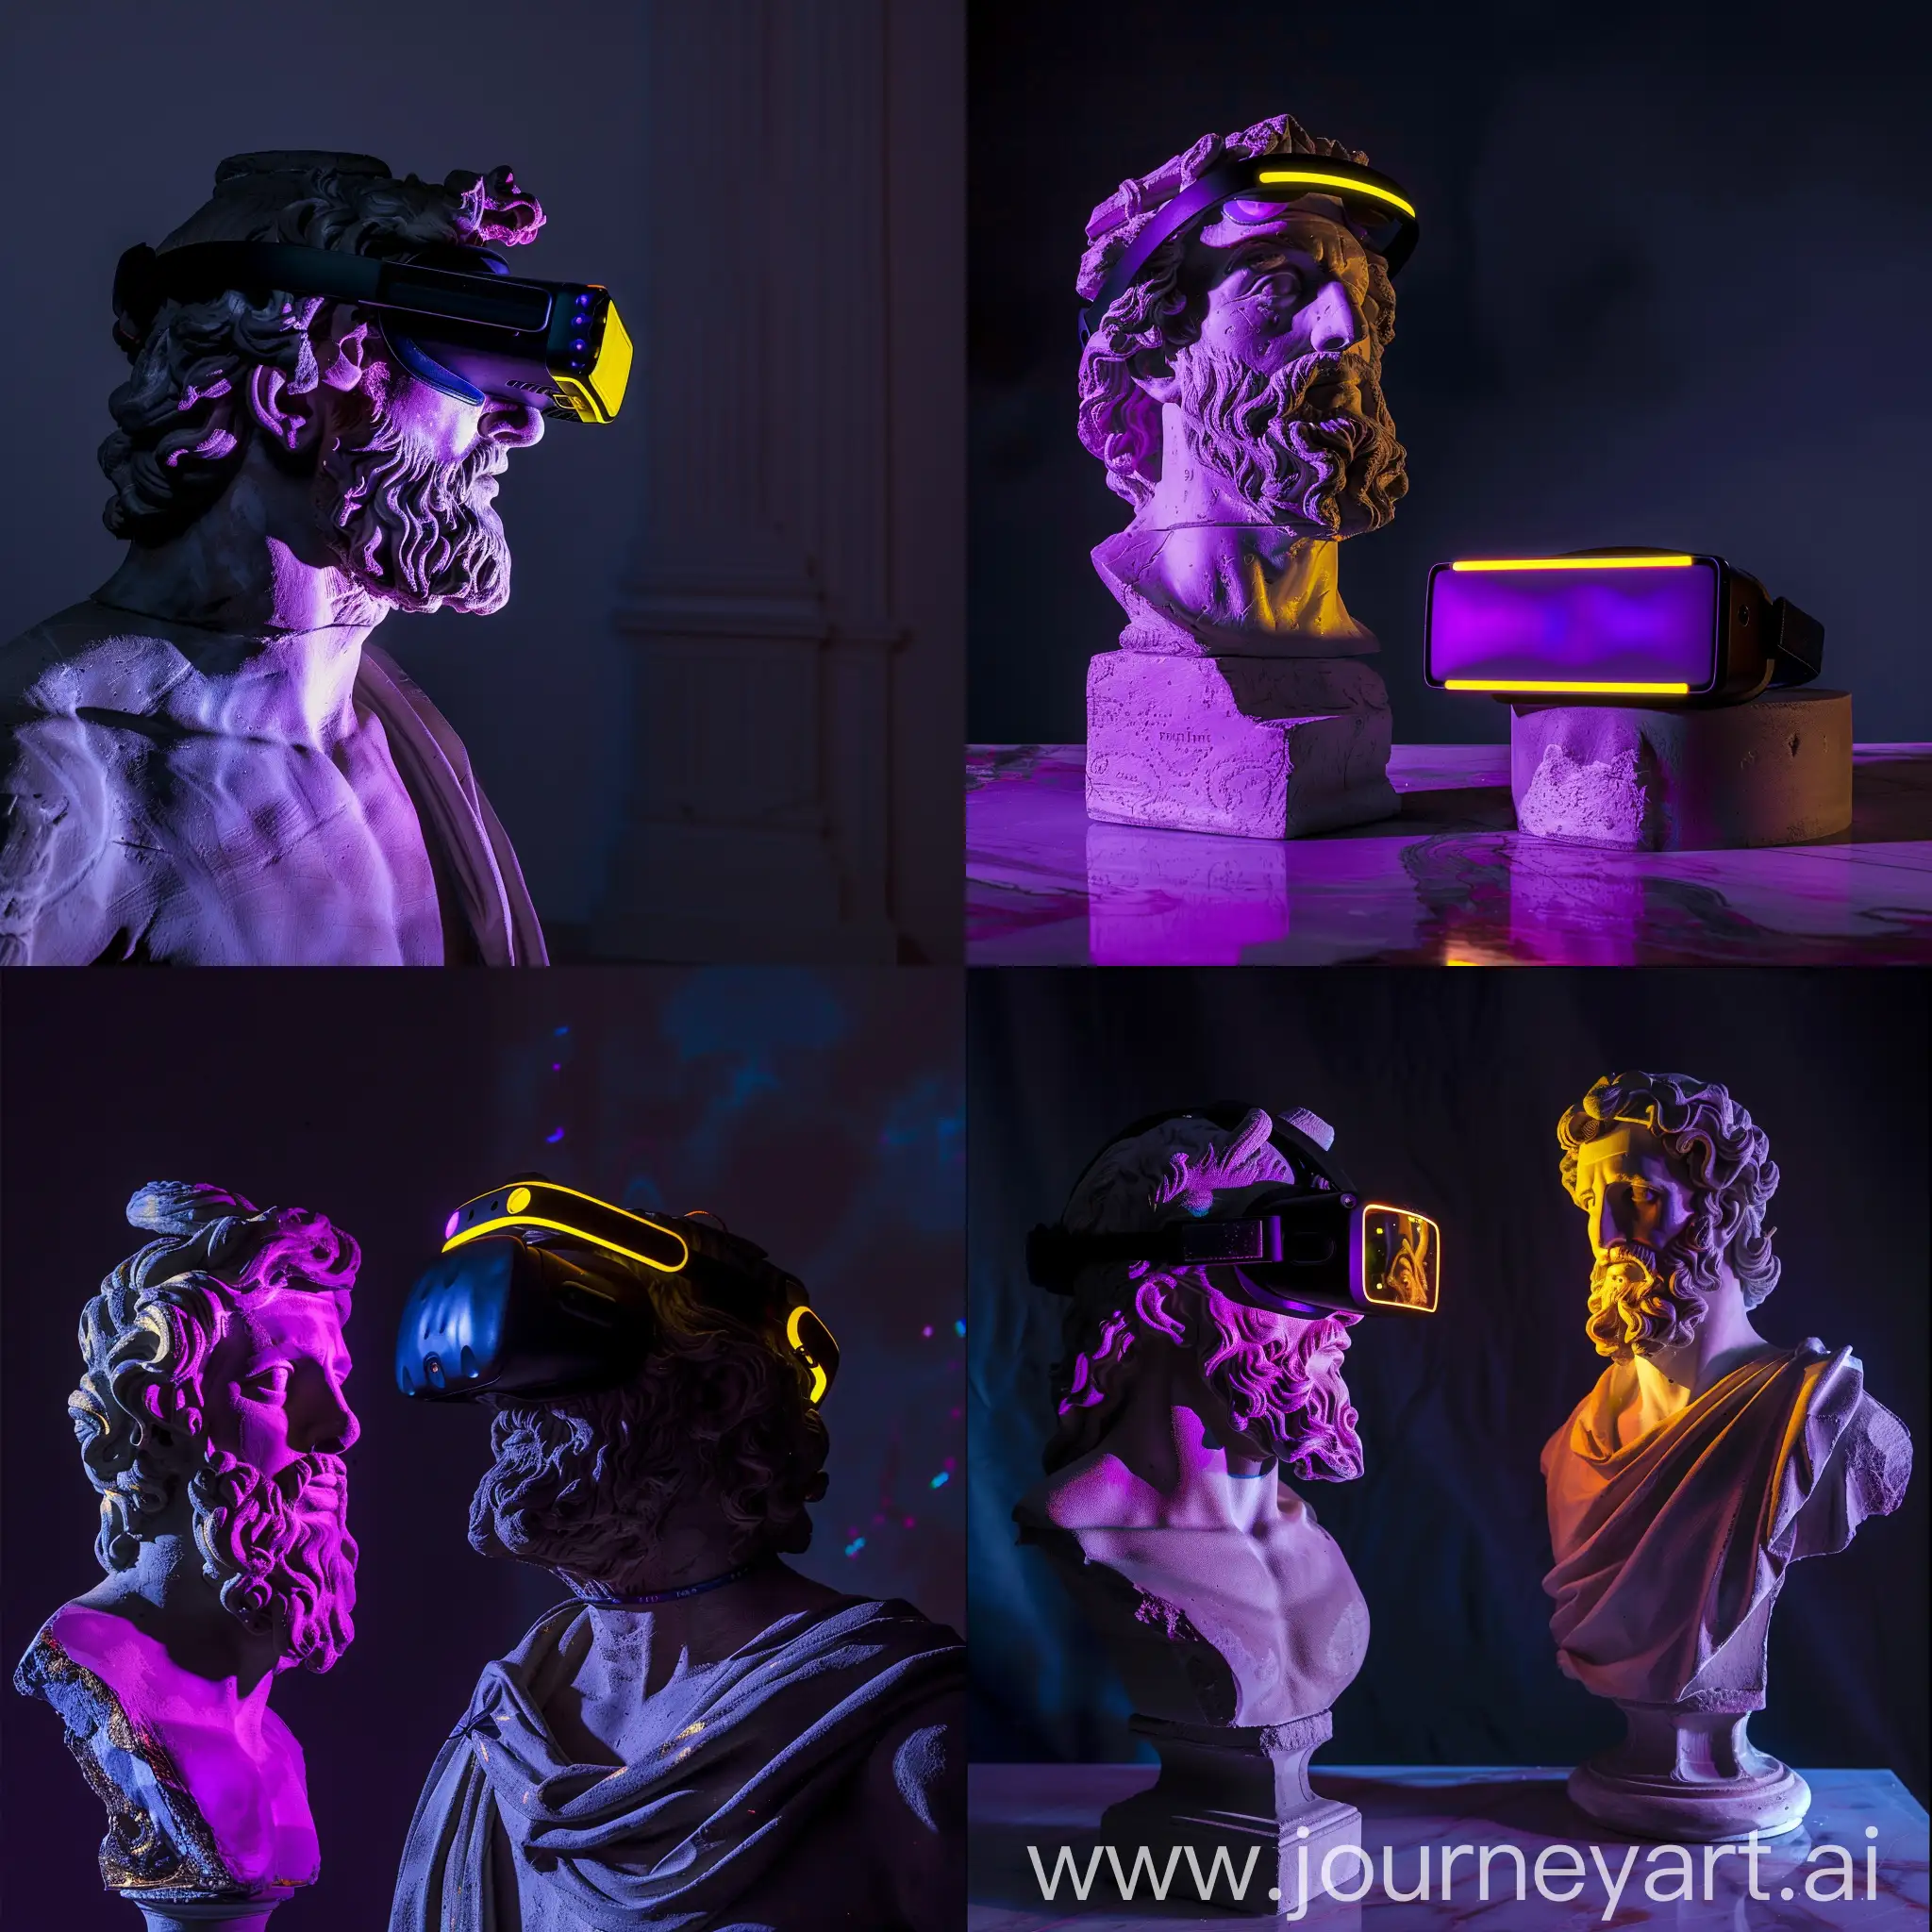 A Plaster Sculpture of Zeus in Left of the Photo, Black VR Glasses With Yellow LED, Purple Light Reflections on Sculpture, Dark Background, Dreamy Pose, Medium Shot, High Precision --v 6.0